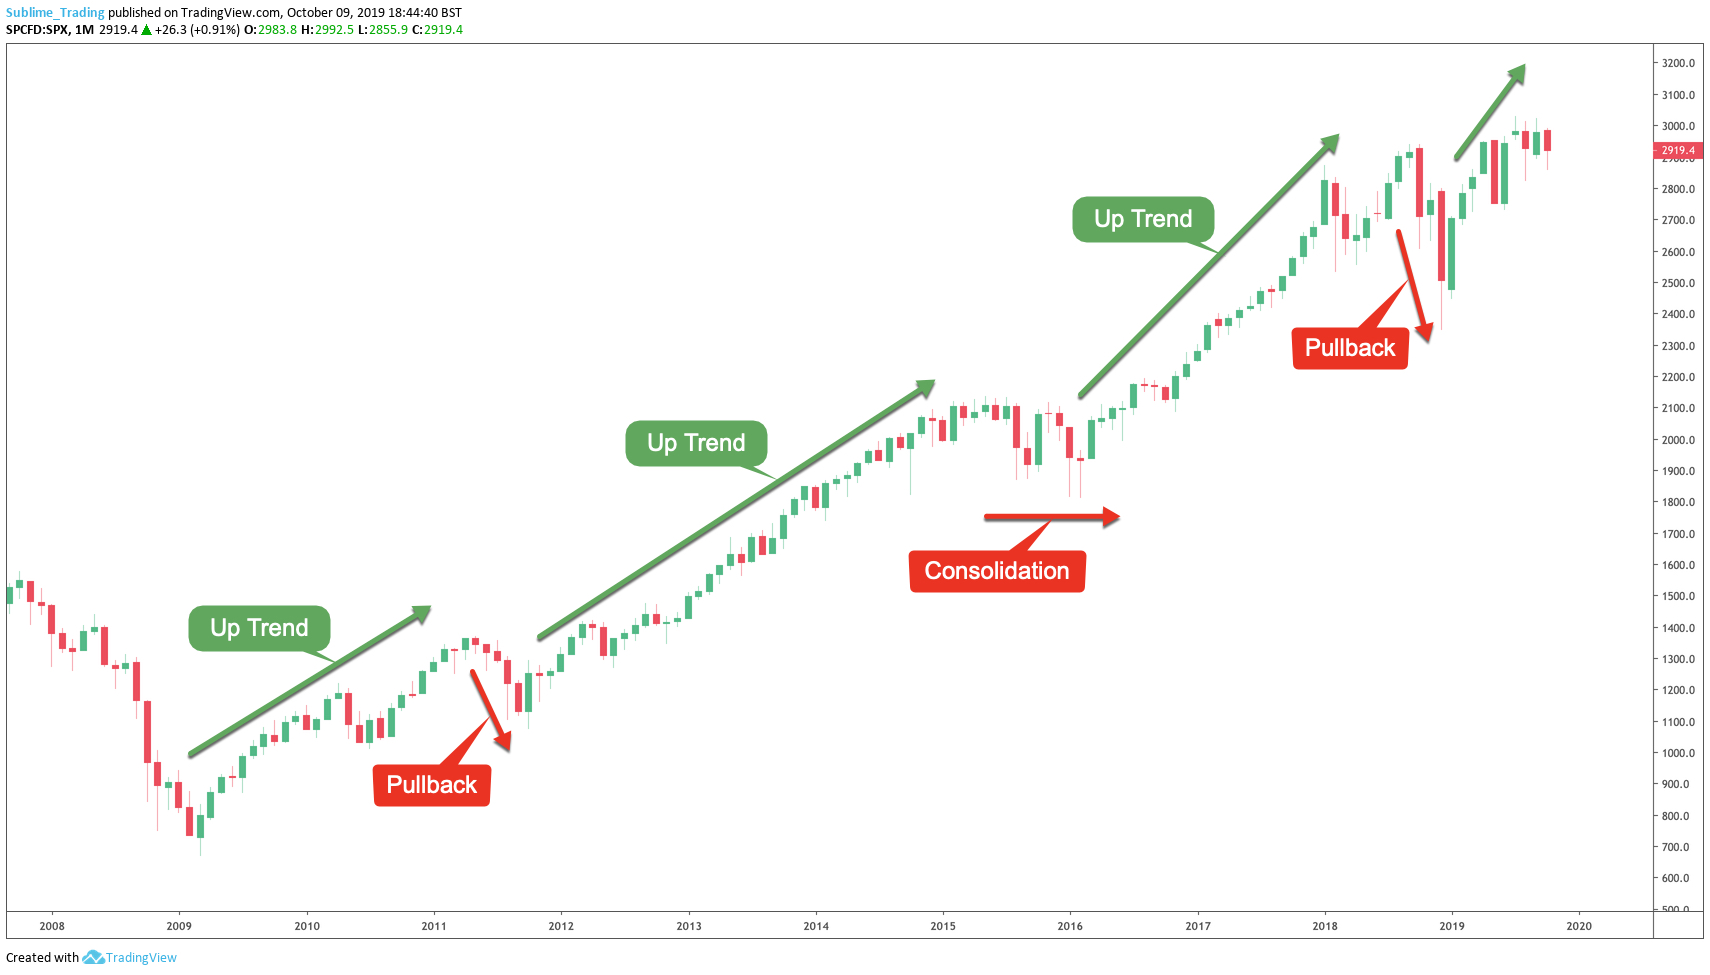 The S&P 500 daily chart shows good examples of a trend pattern repeating itself over and over again.